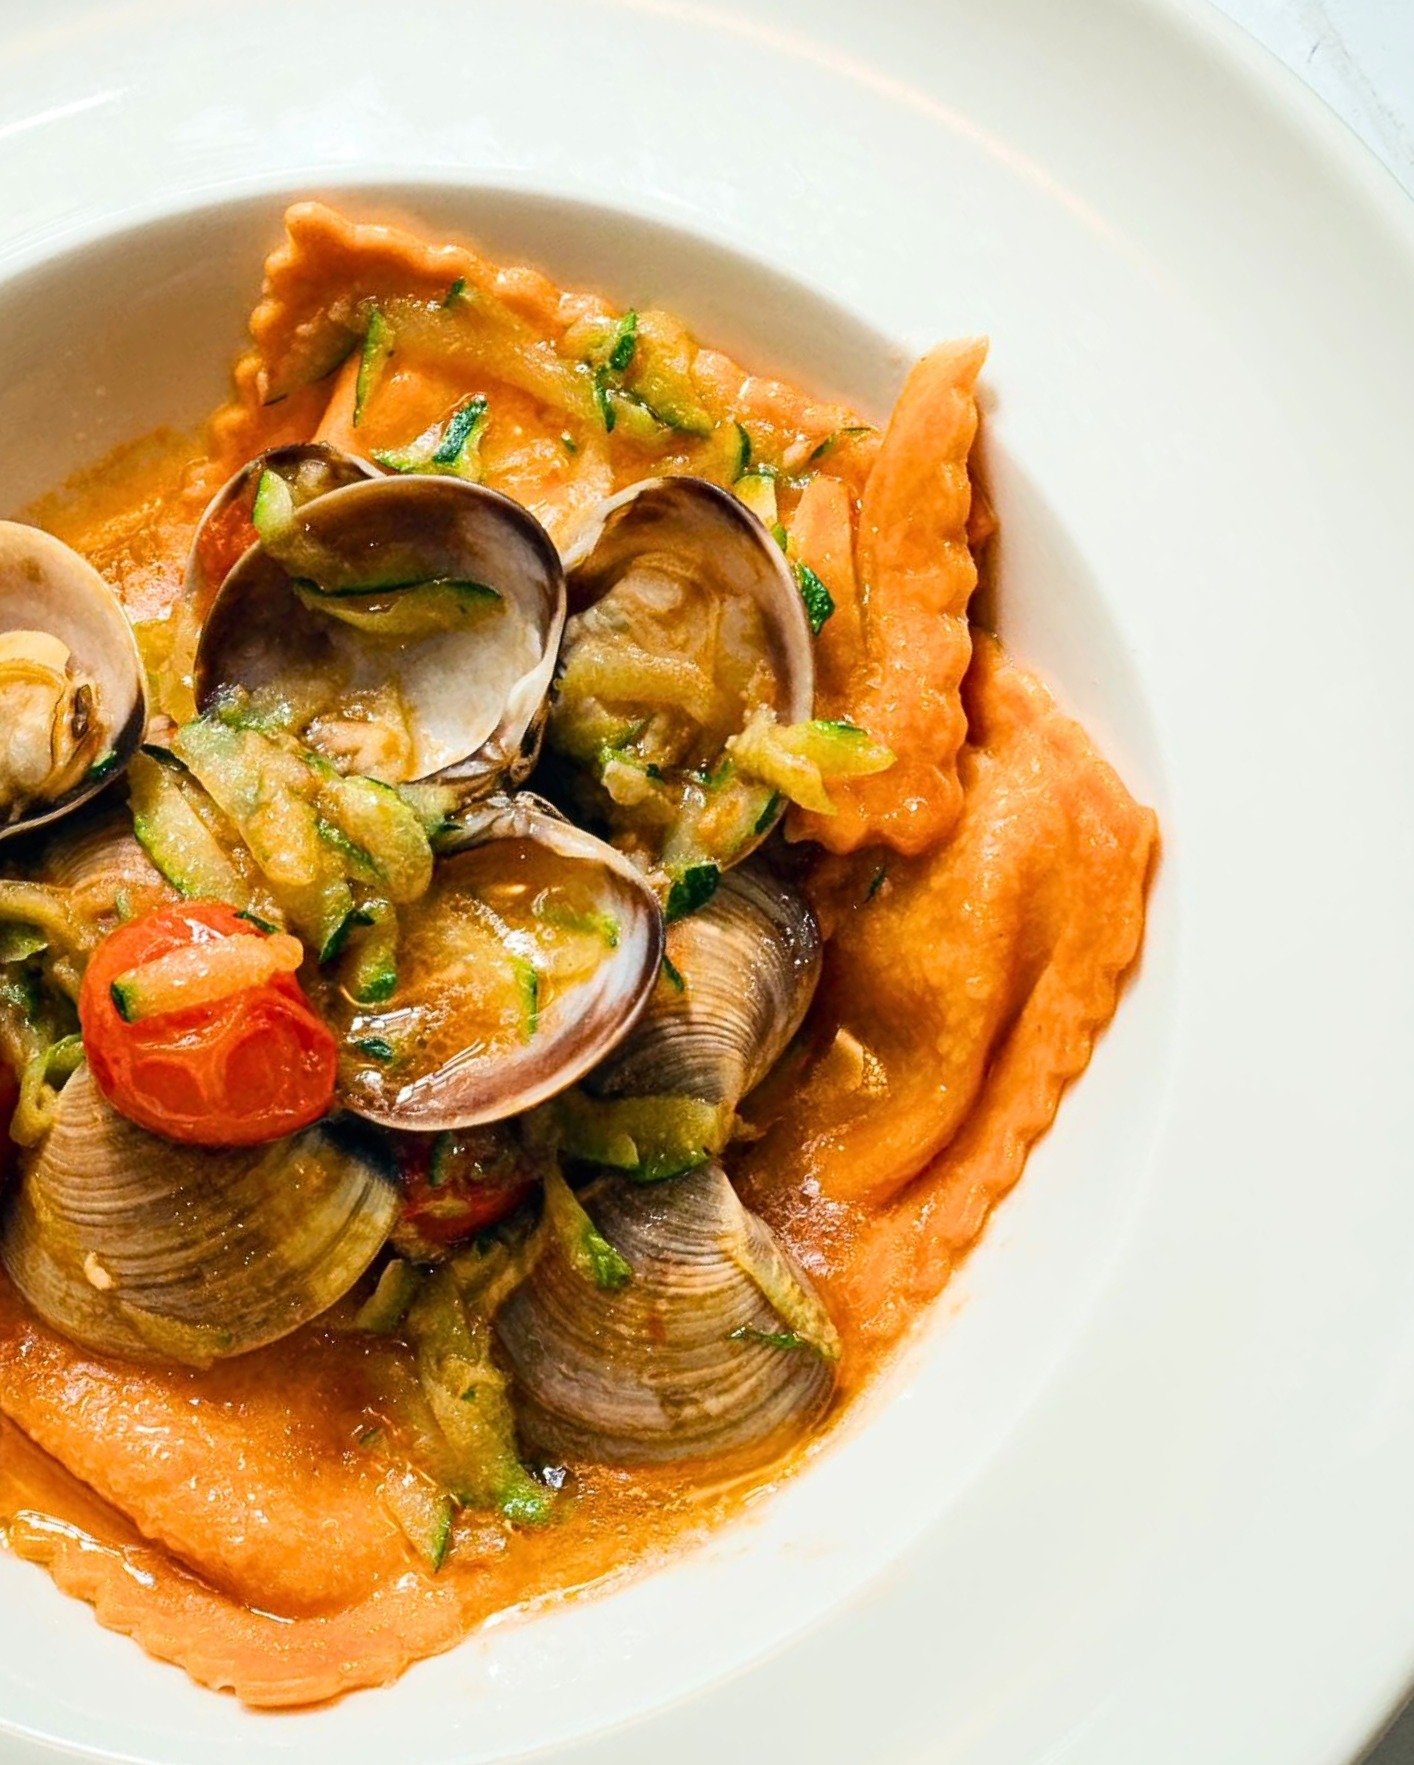 You can almost hear the little tomato whispering, &quot;I could've been ketchup, but here I am. Luckily, on something a bit m ore delicious!&quot;

Seabass ravioloni with clams. What else? ❤️